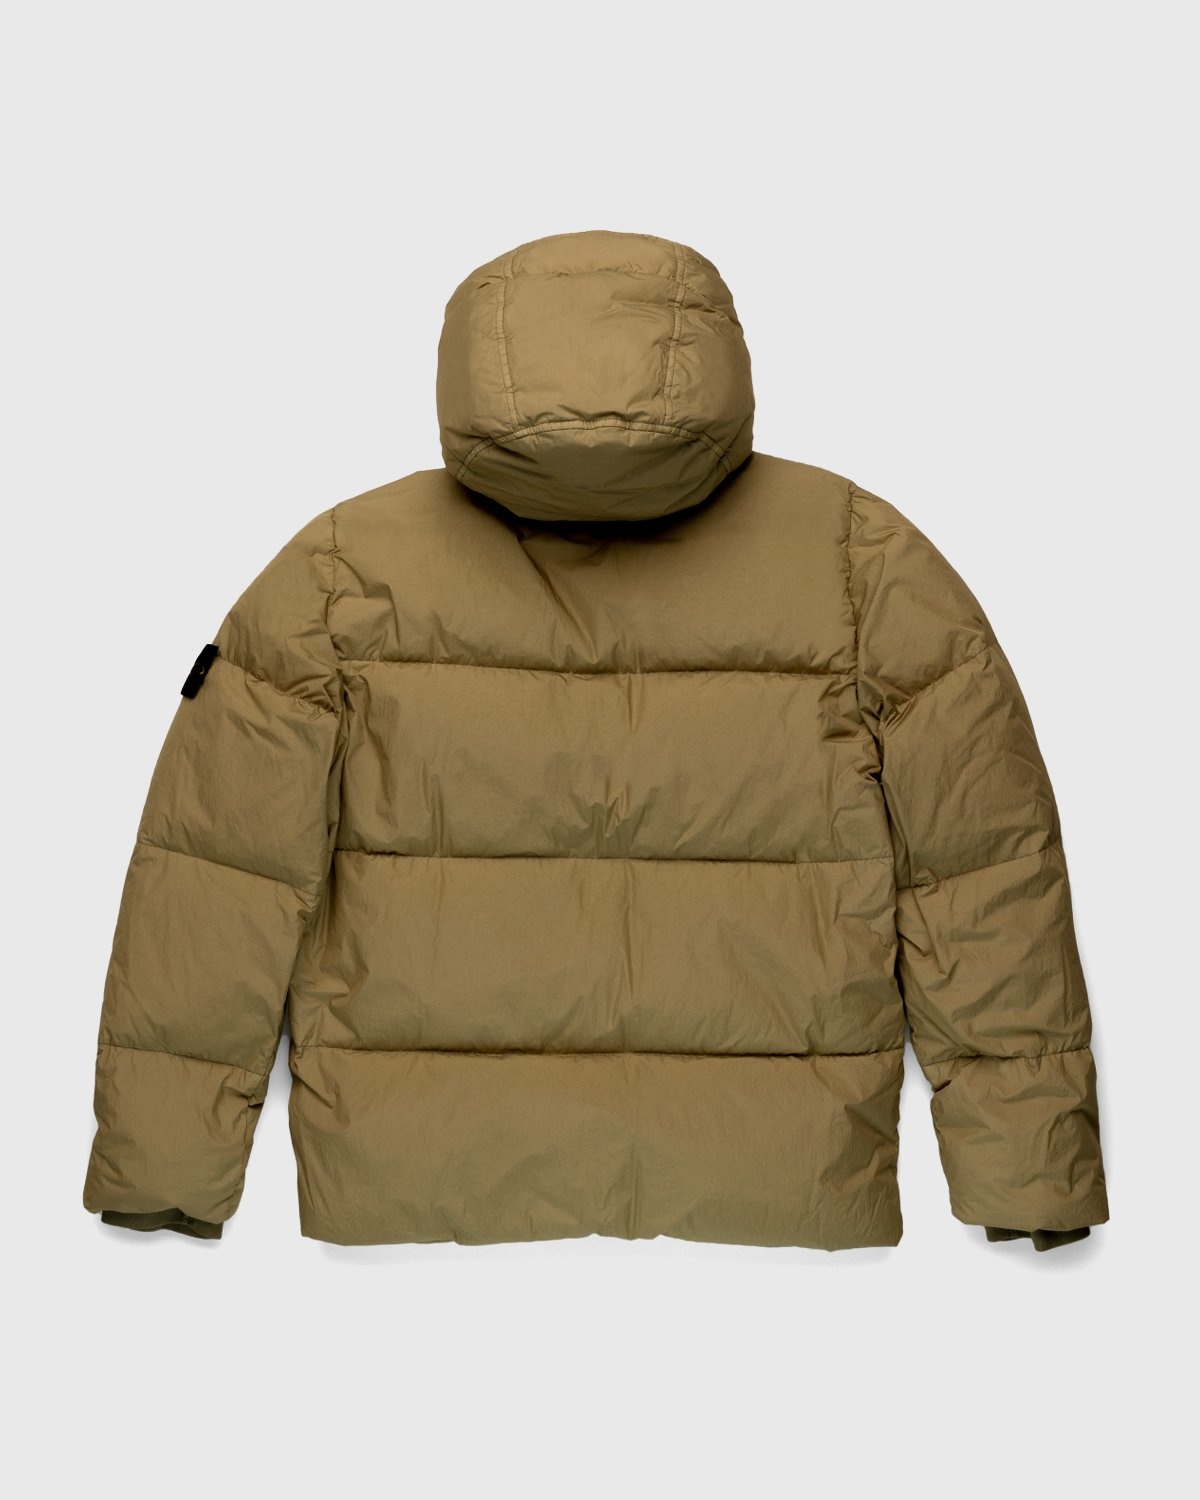 Stone Island – Real Down Jacket Natural Beige - Outerwear - Beige - Image 2